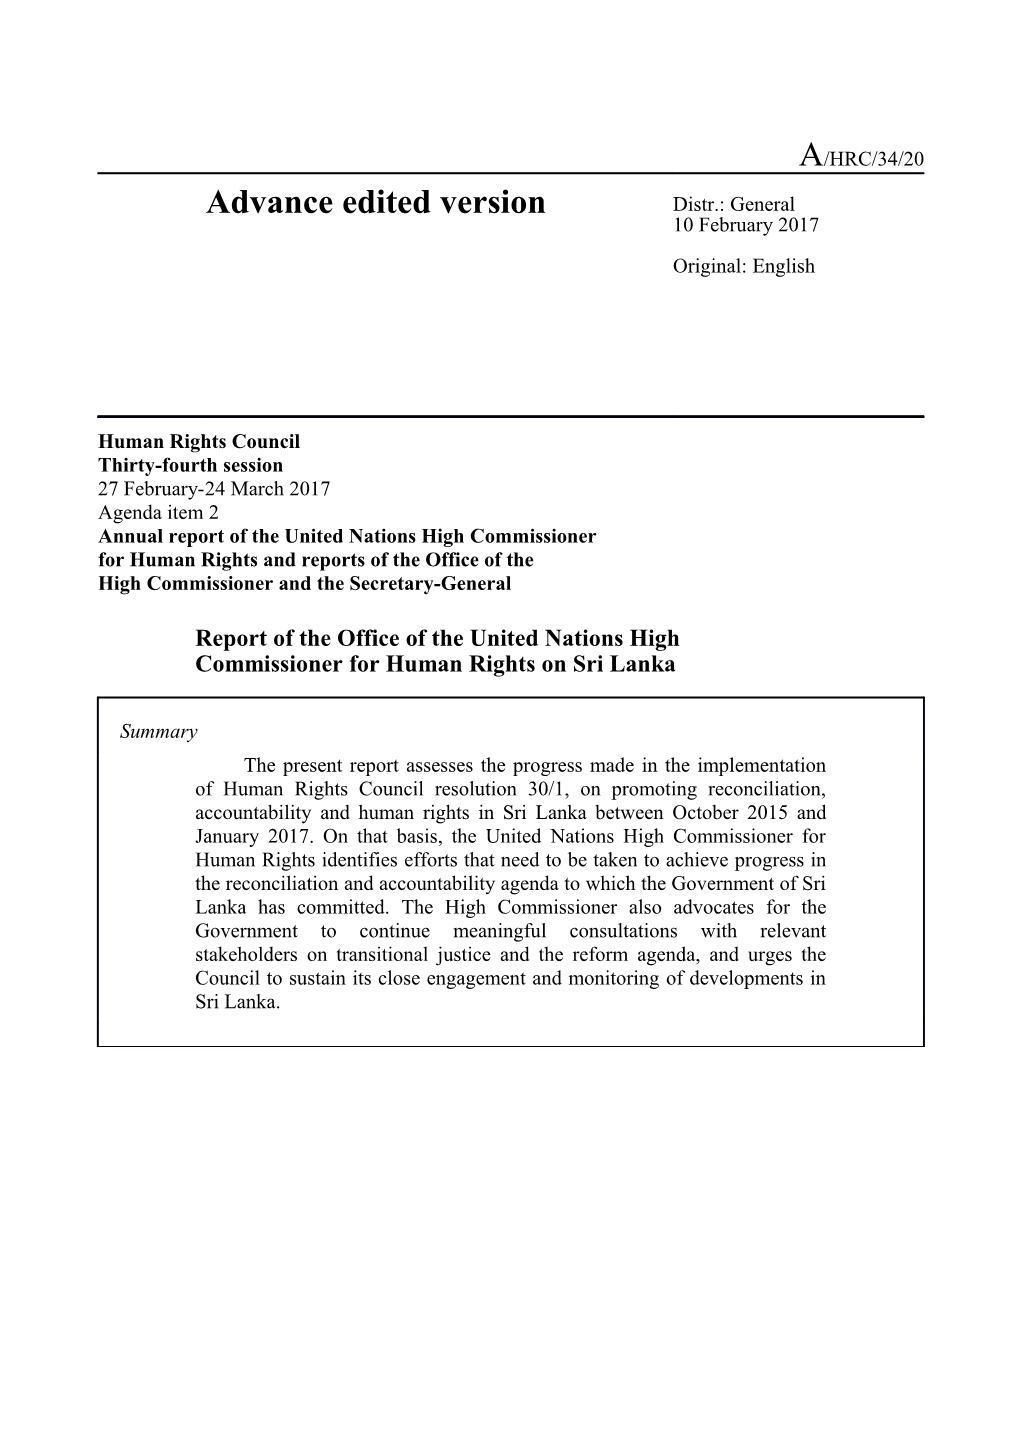 Report of the Office of the United Nations High Commissioner for Human Rights on Sri Lanka